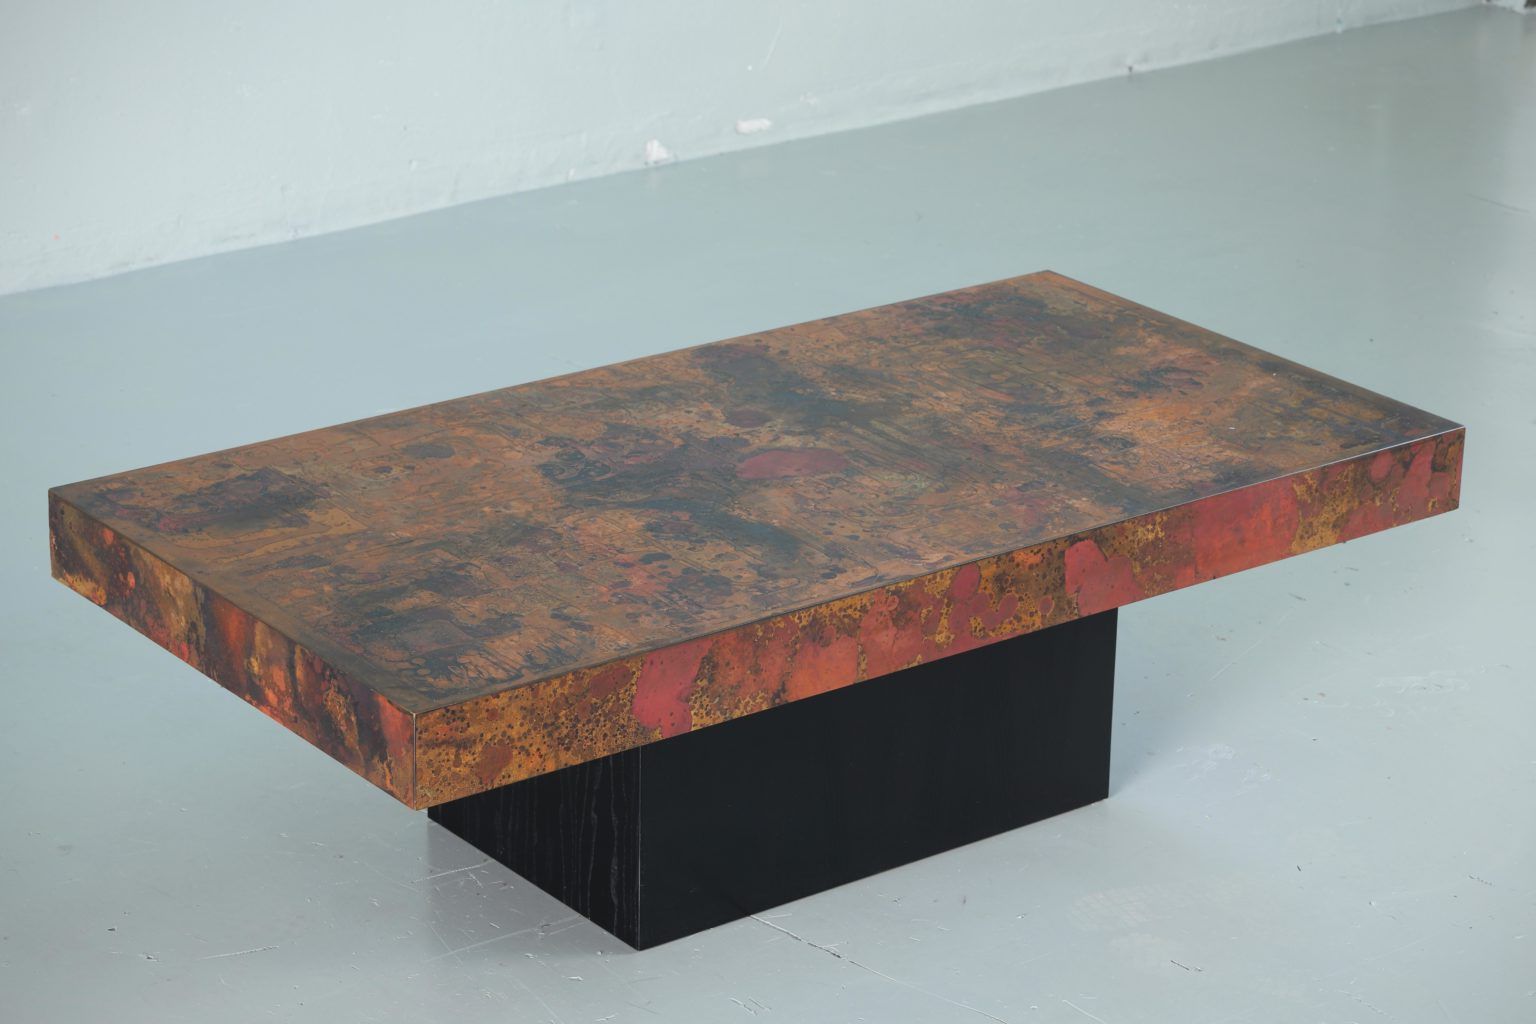 Oxidized Coffee Tables Pertaining To Famous Coffee Tablebernhard Rohne, 1966, Oxidized And Etched (View 1 of 20)